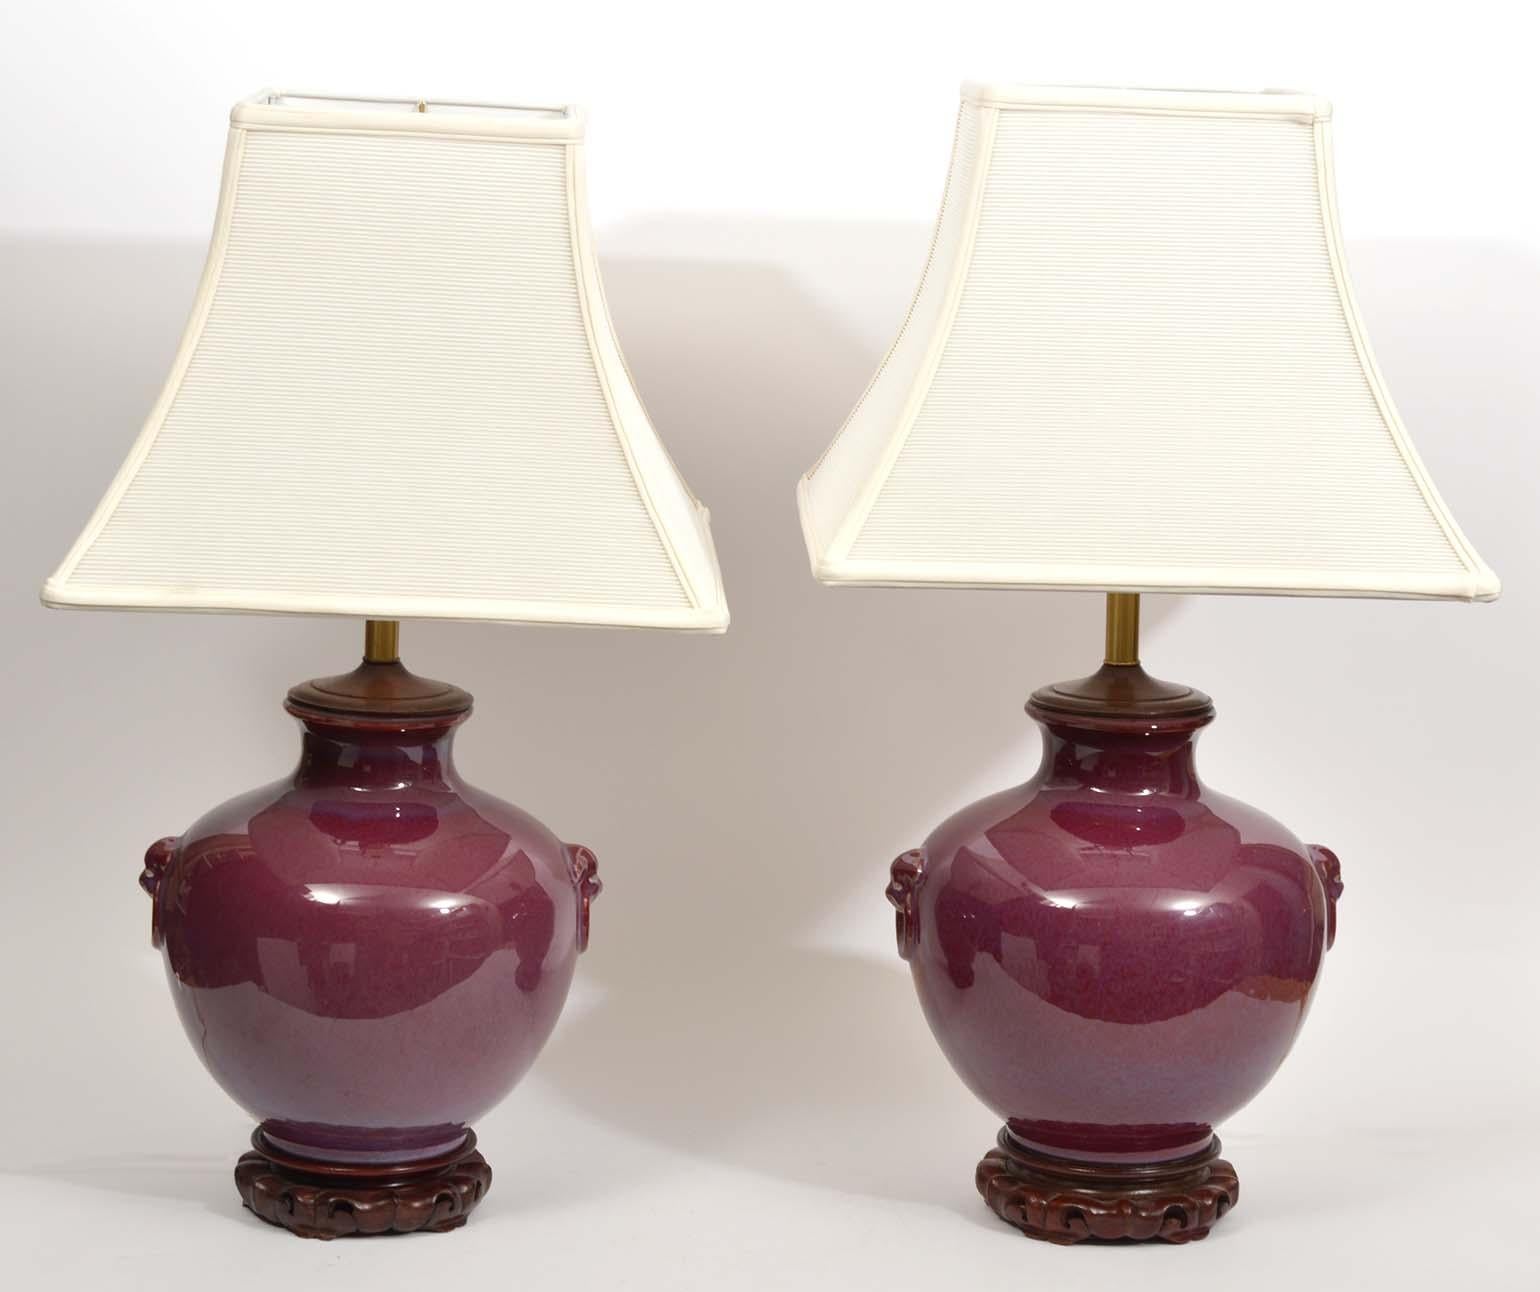 This pair of urn shaped Chinese oxblood glazed ceramic table lamps feature deep color surfaces accented by stylized lion head handles in haut relief. The rest on carved hardwood bases matching the circular wood lids through which the lamp pictures